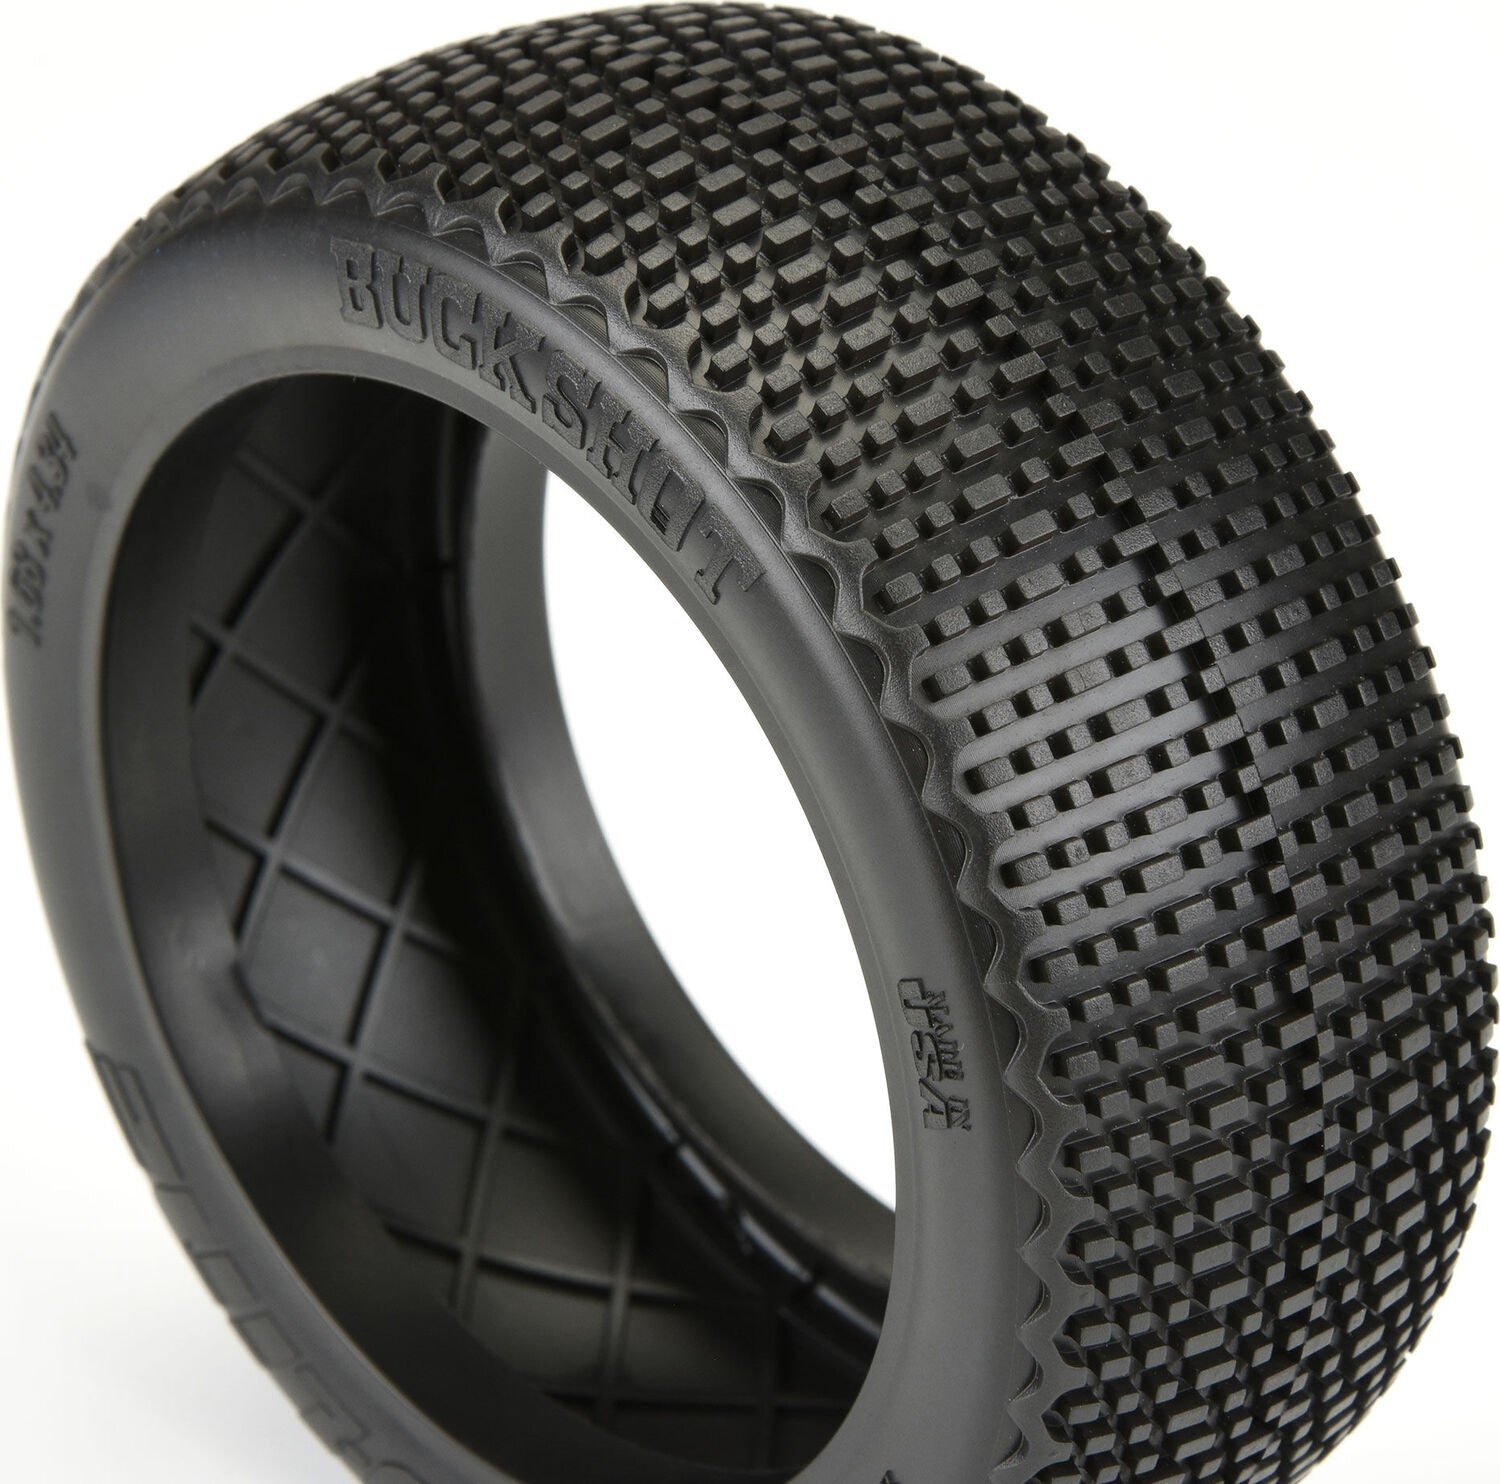 1/8 Buck Shot S3 Front/Rear Off-Road Buggy Tires (2)